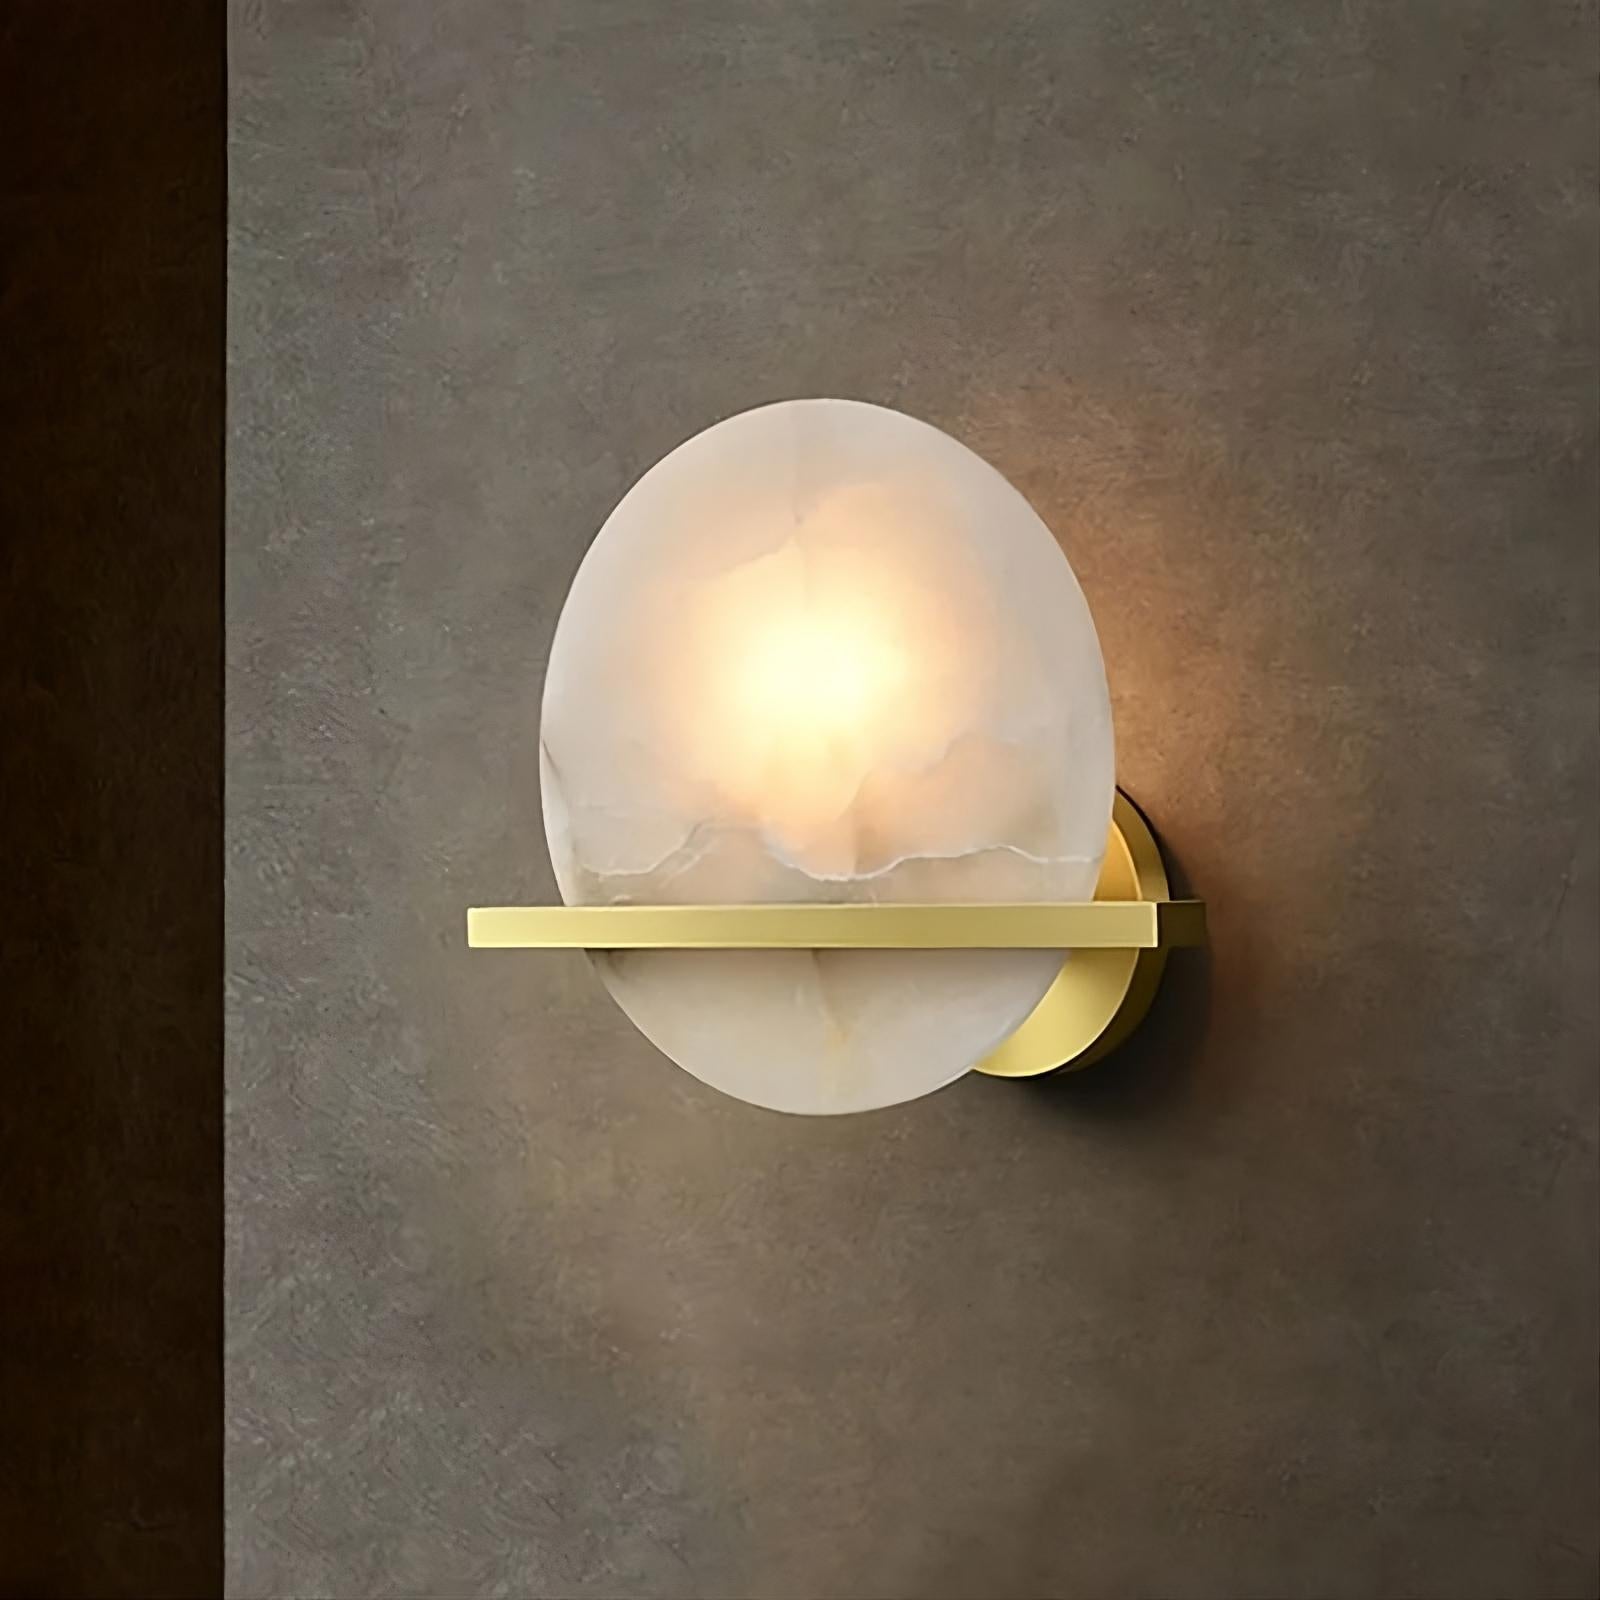 A modern wall sconce with a circular, frosted white glass shade emits a warm LED light source. The fixture is mounted on a smooth, dark wall and features a sleek, horizontal gold accent bar that appears to divide the sconce, embodying contemporary design. This exquisite piece is the Natural Marble Wall Light Sconce by Morsale.com.